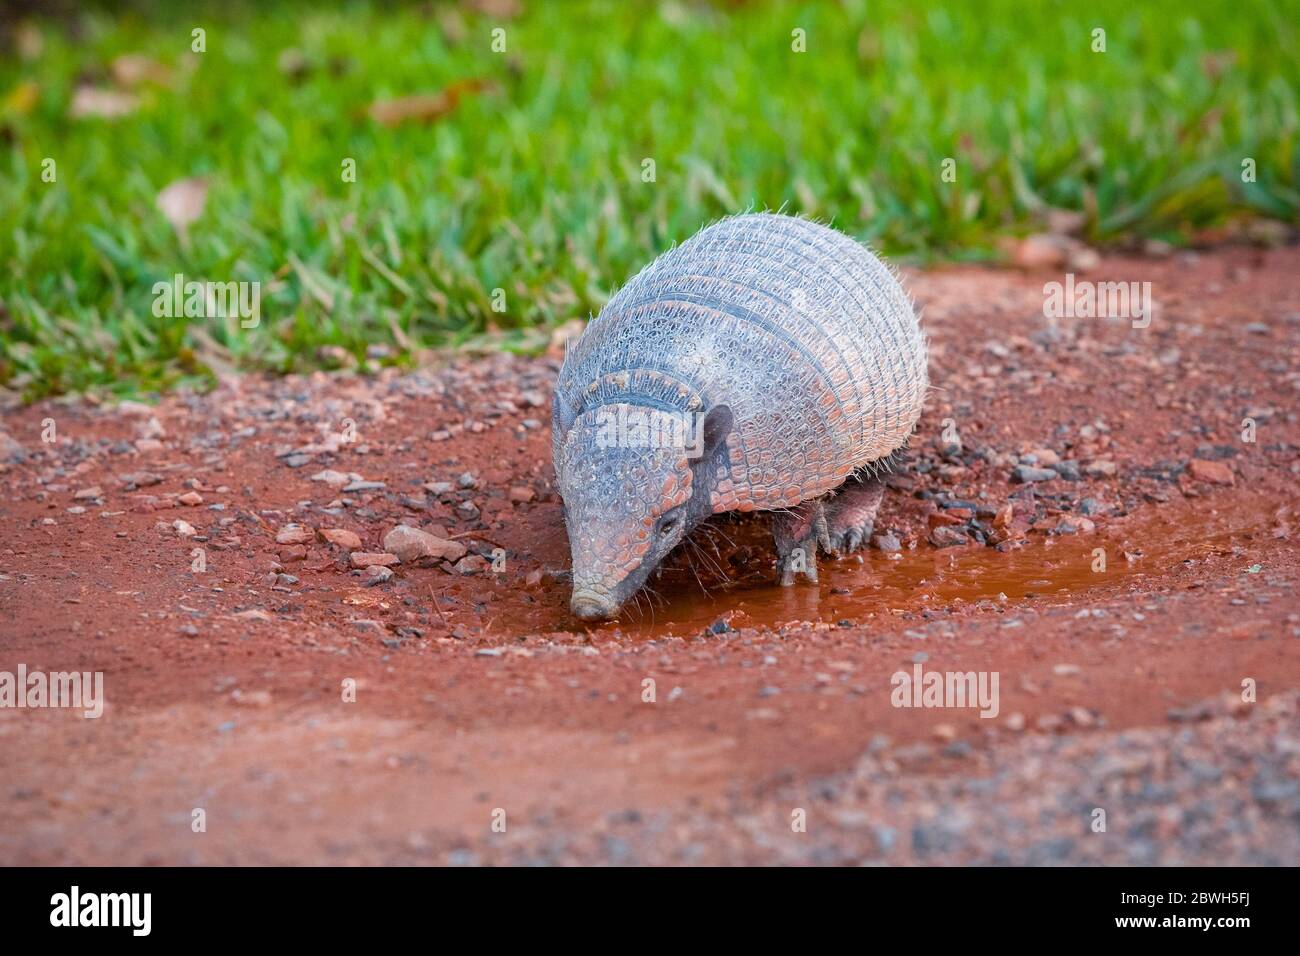 six-banded armadillo, Euphractus sexcinctus, also known as yellow armadillo, drinking water from a paddle, Bonito, Mato Grosso do Sul, Brazil, South A Stock Photo